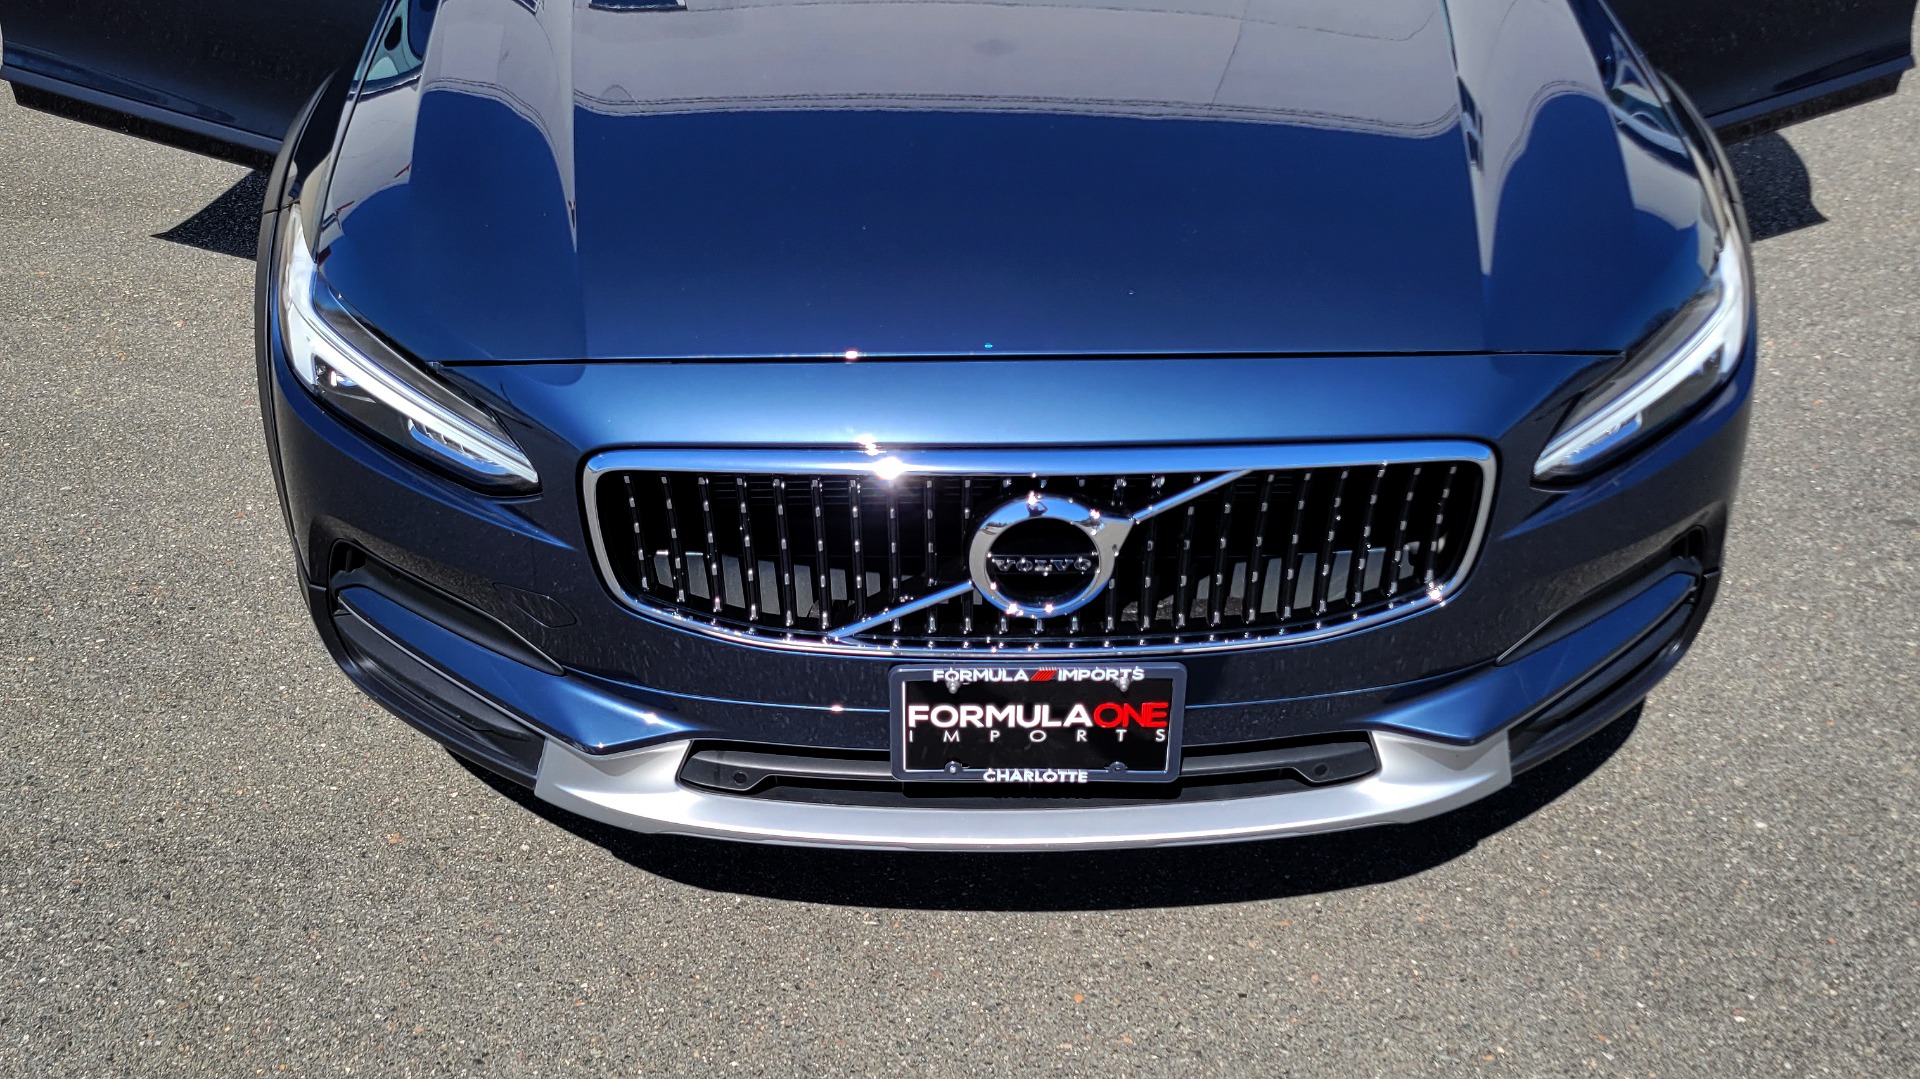 Used 2020 Volvo V90 CROSS COUNTRY T6 2.0L WAGON / AWD / HTD STS / PROTECTION PKG / REARVIEW for sale $51,000 at Formula Imports in Charlotte NC 28227 23